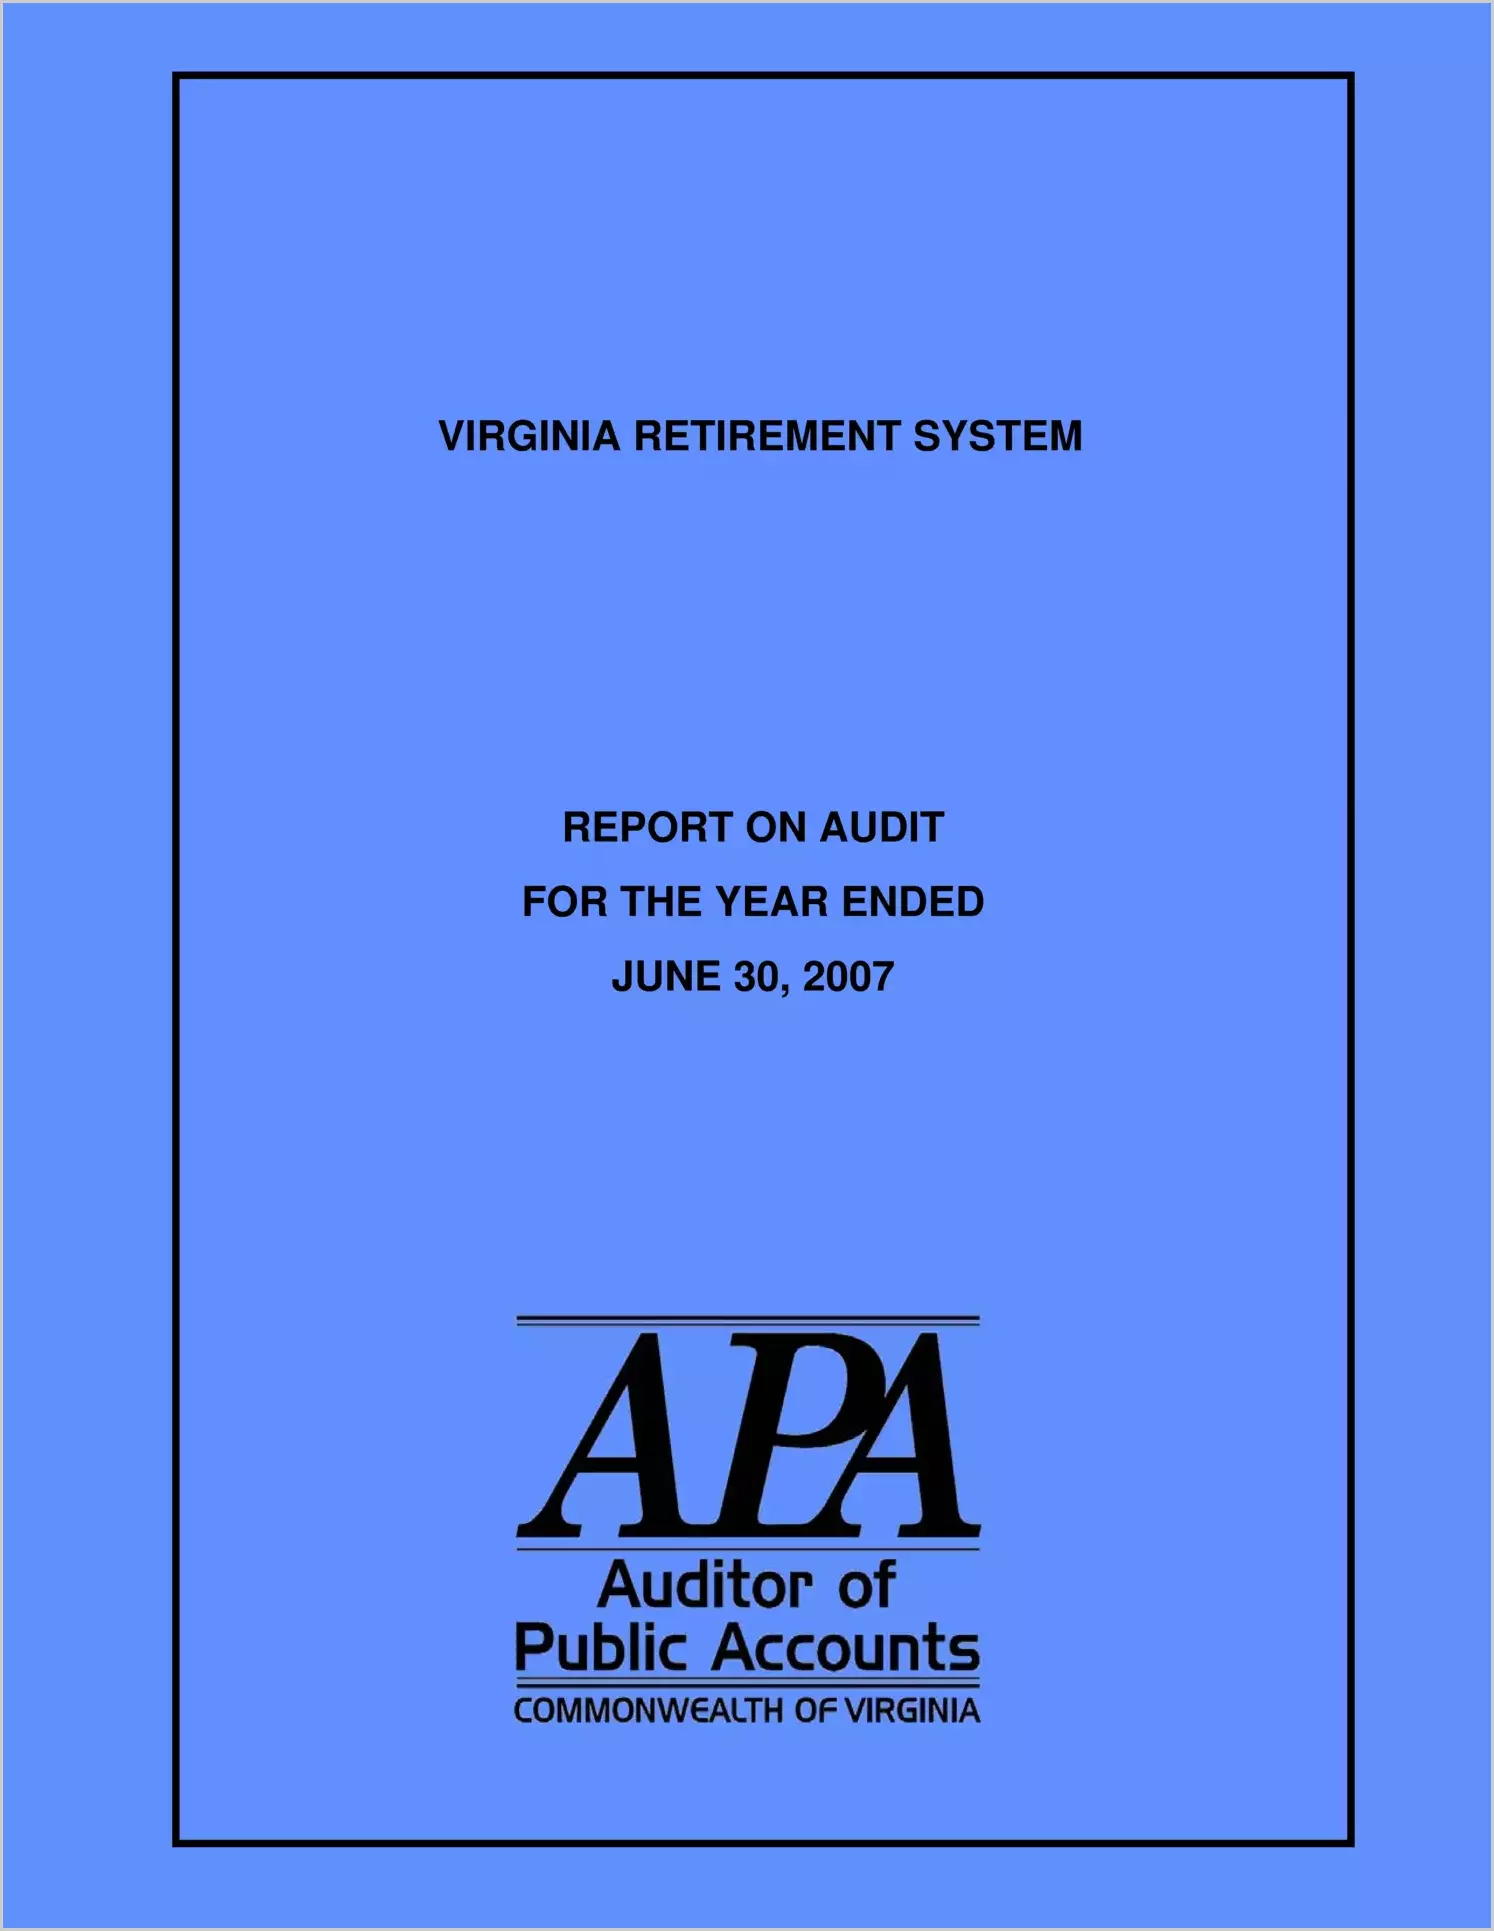 Virginia Retirement System for the year ended June 30, 2007